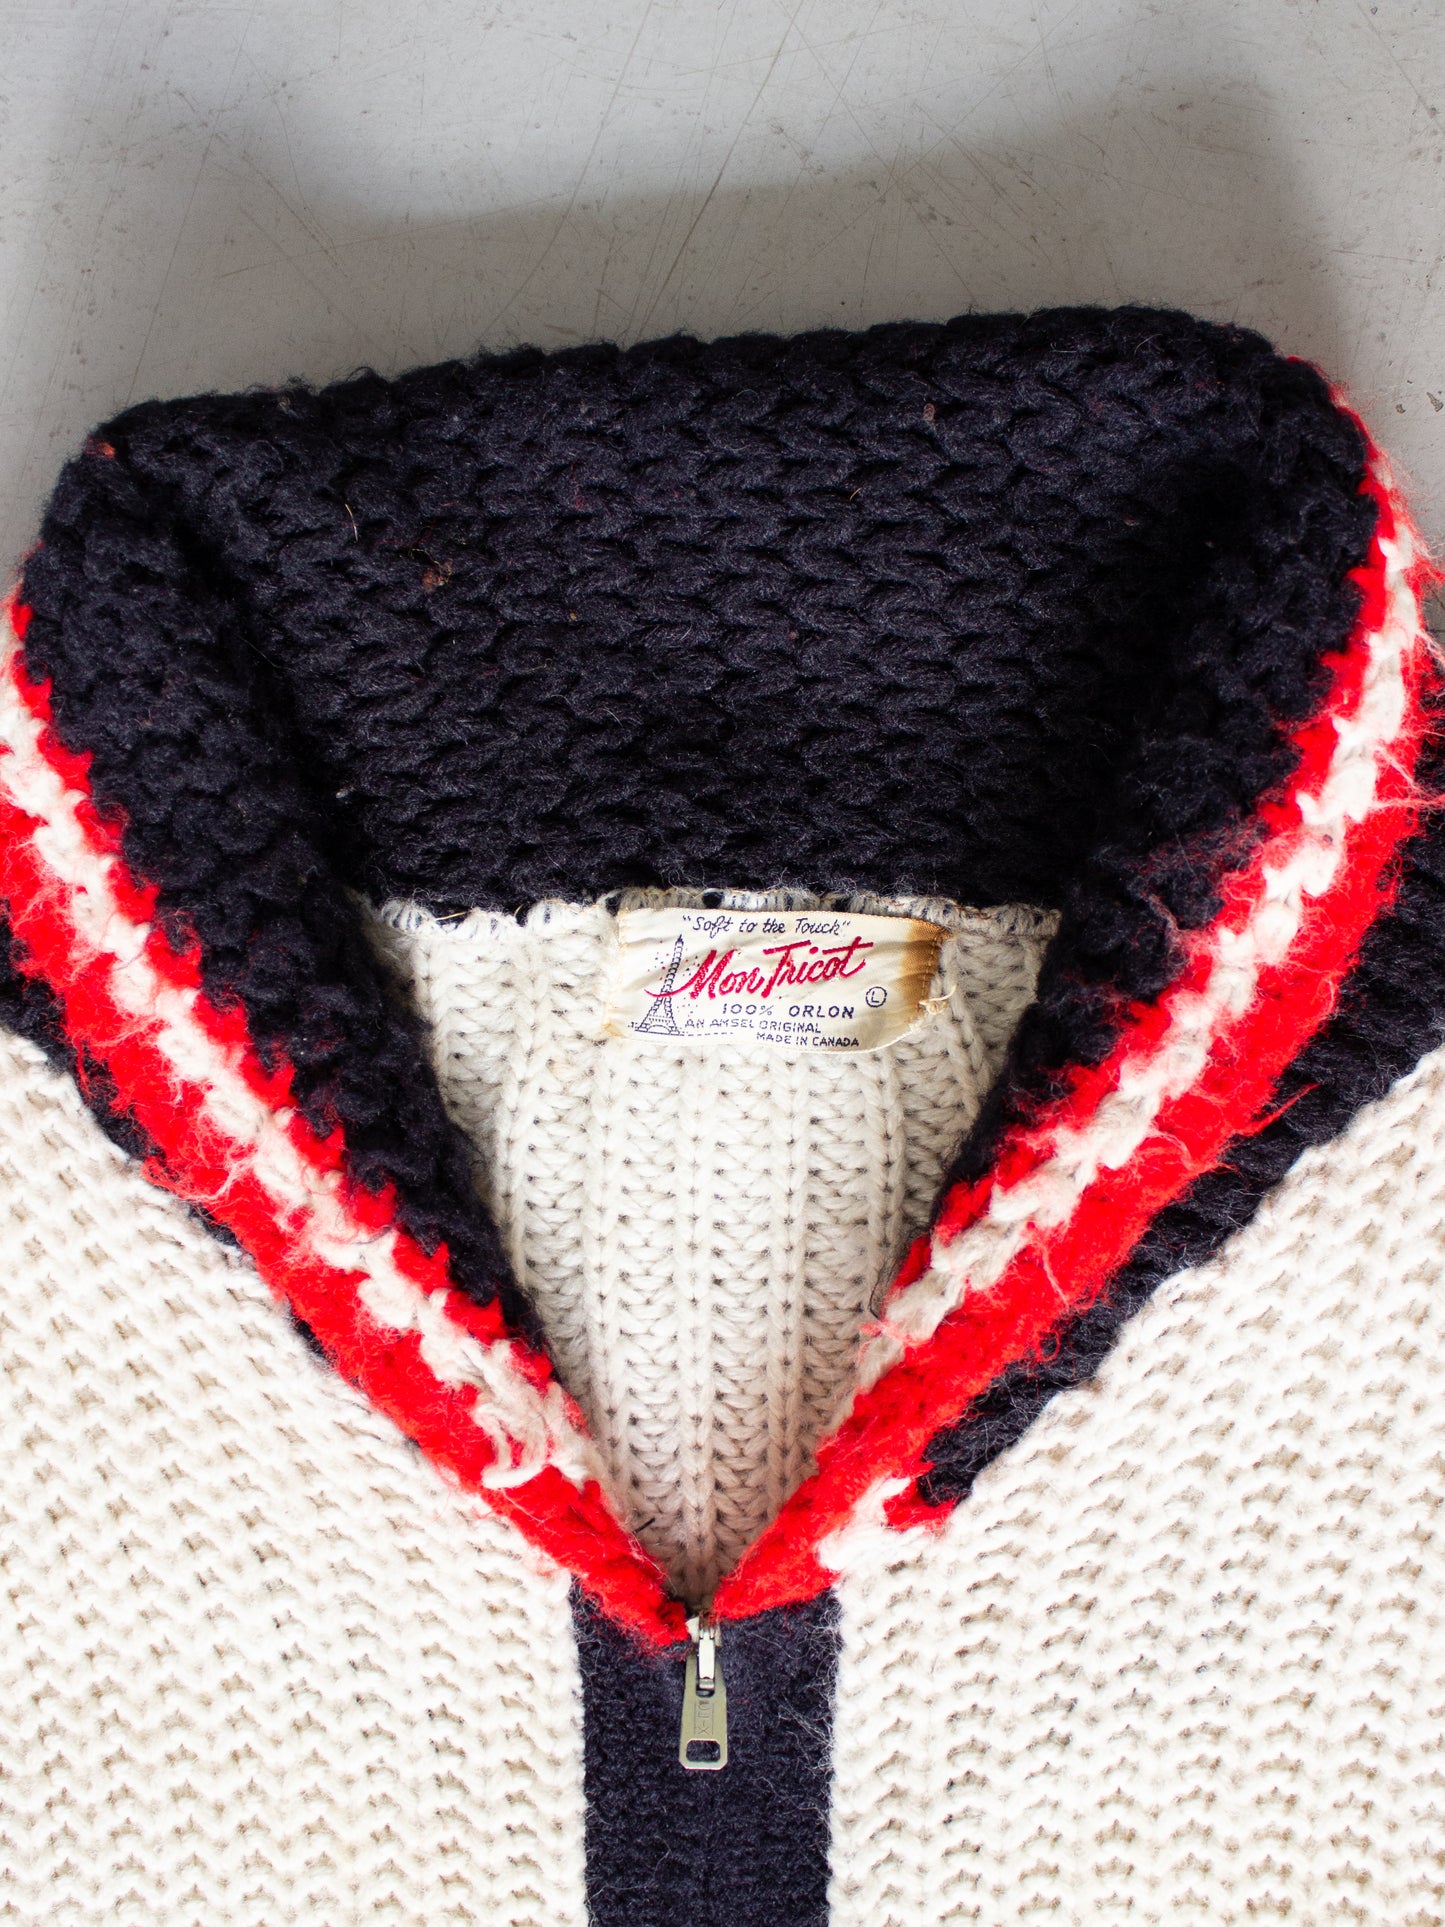 1960's 1970's Mon Tricot Curling Cowichan Style Knit Sweater Made In Canada Large